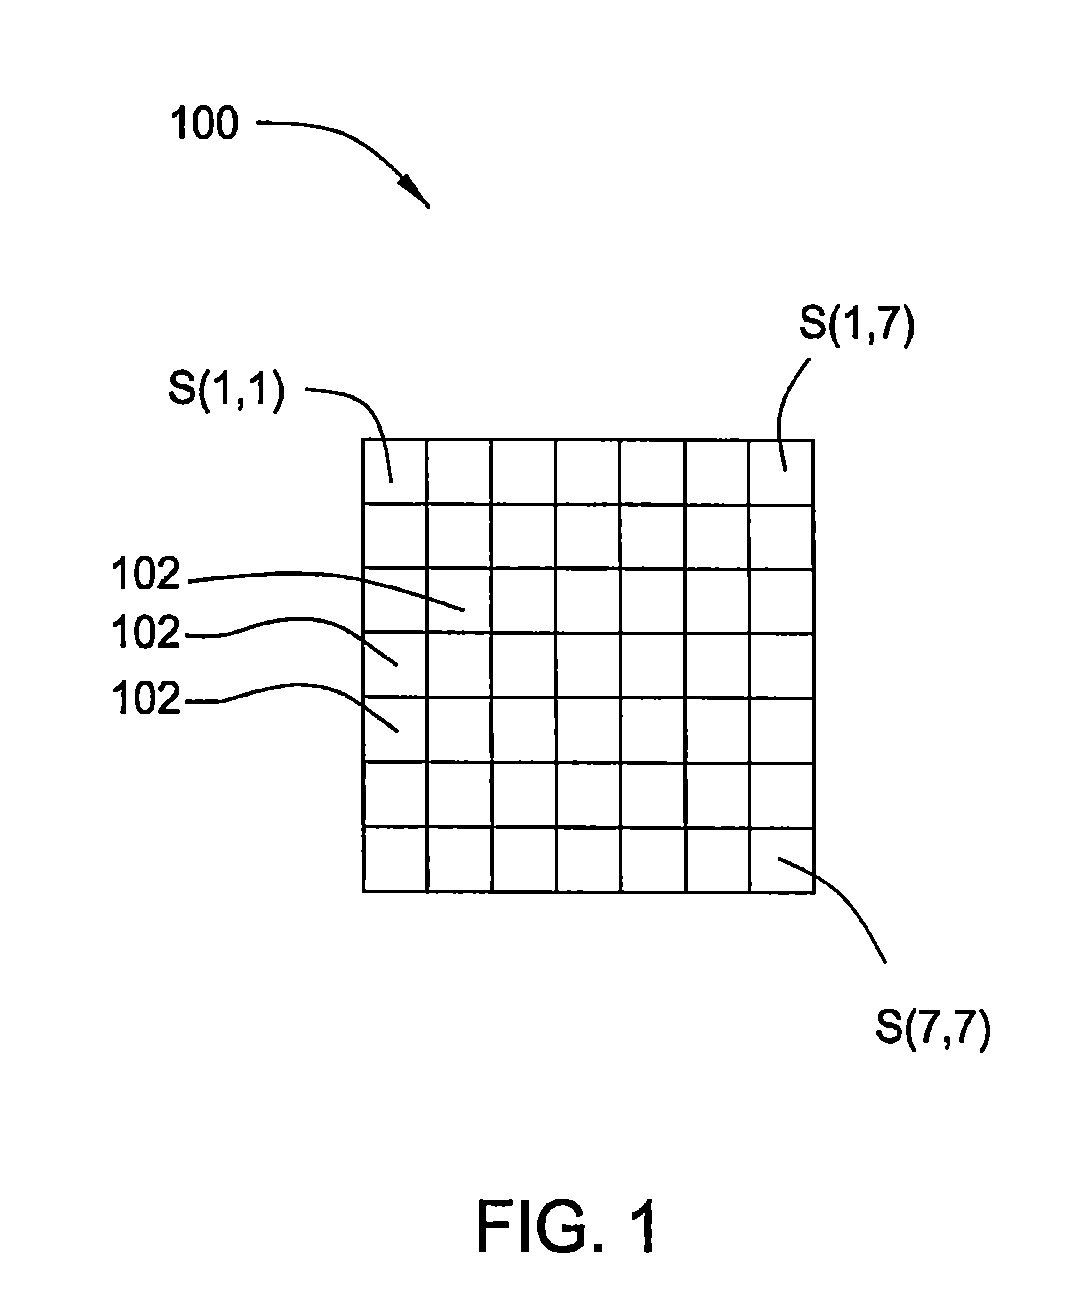 Spatially offset multi-imager-panel architecture for projecting an image